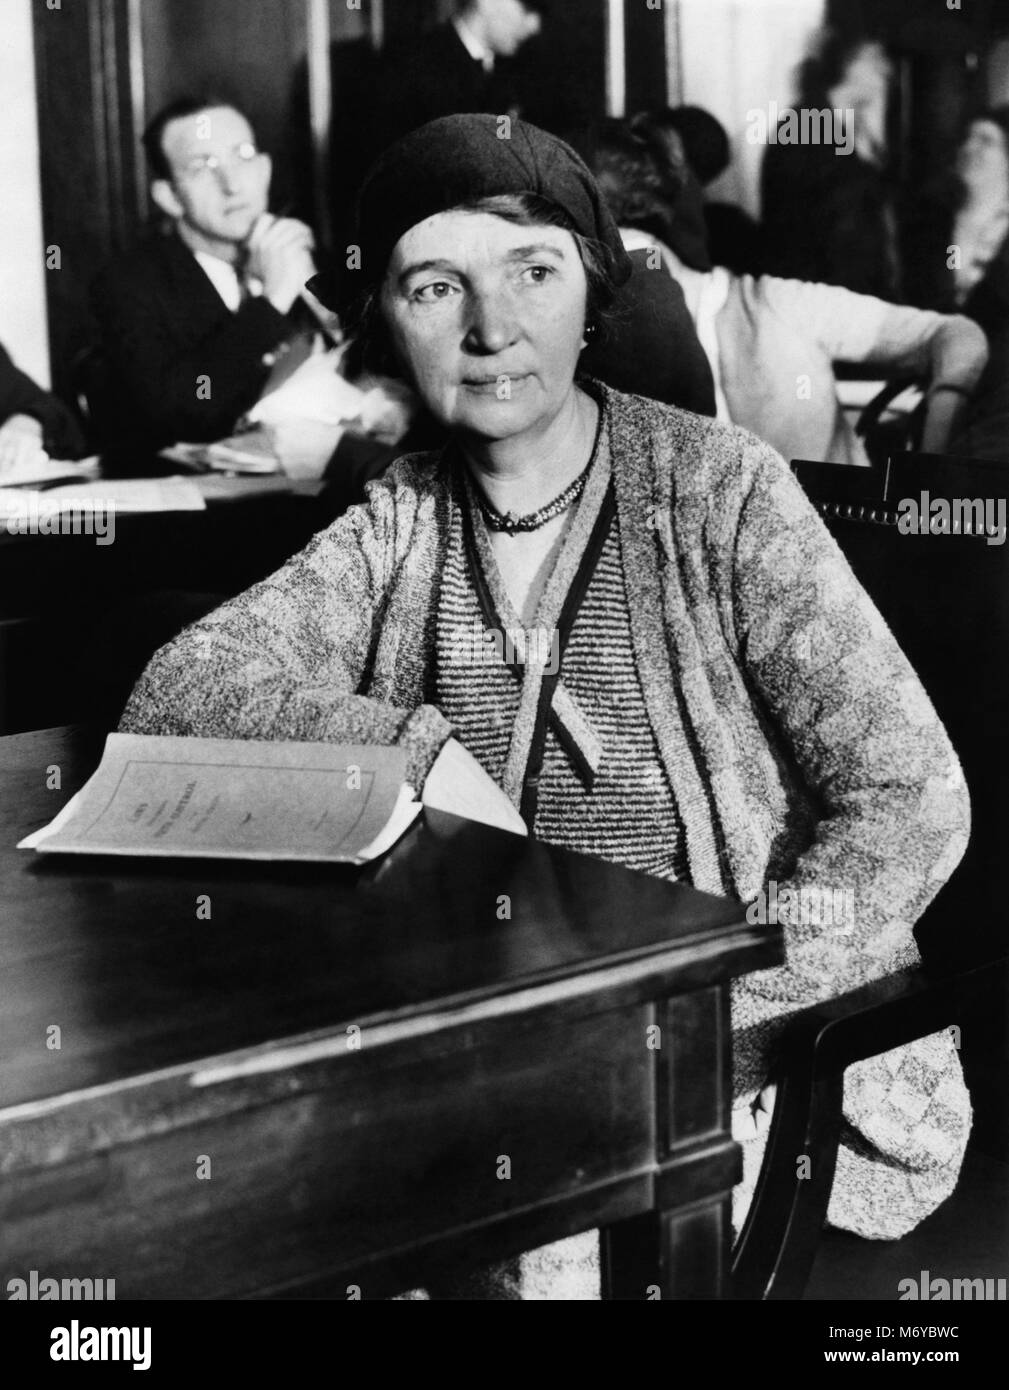 Margaret Sanger (1879-1966), Chairman of the National Committee on Federal Legislation for Birth Control, on the stand before a special Senate Committee on February 13, 1931 to testify in favor of birth control as embodied in the Gillett bill (S. 4582). Stock Photo